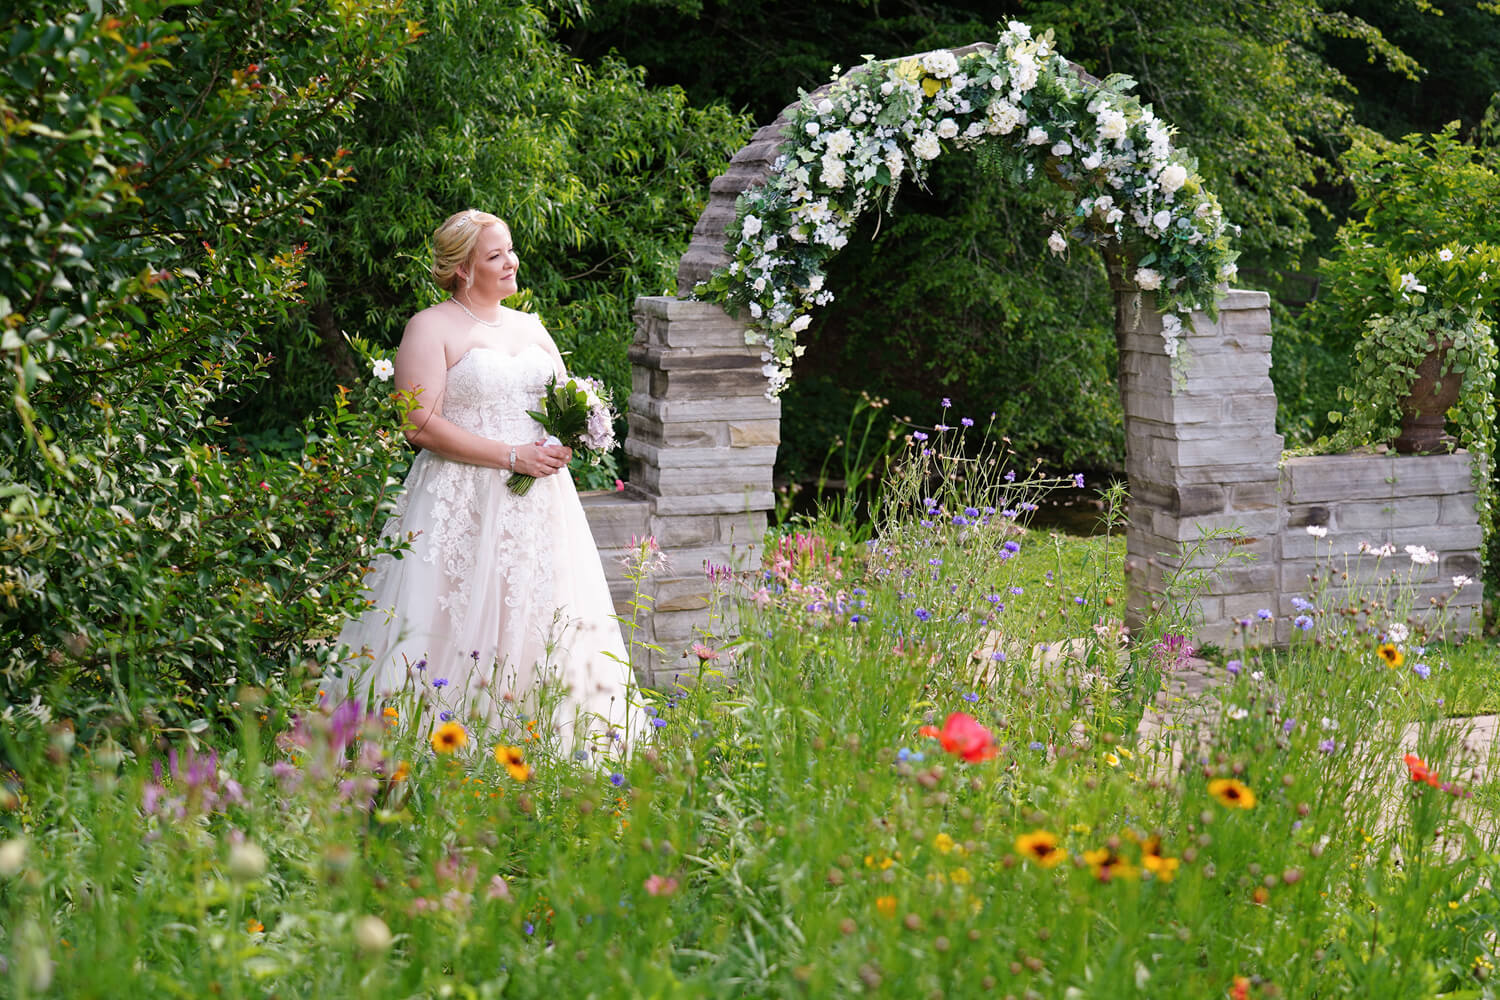 Bride posing in wildflowers in front of a stone arch